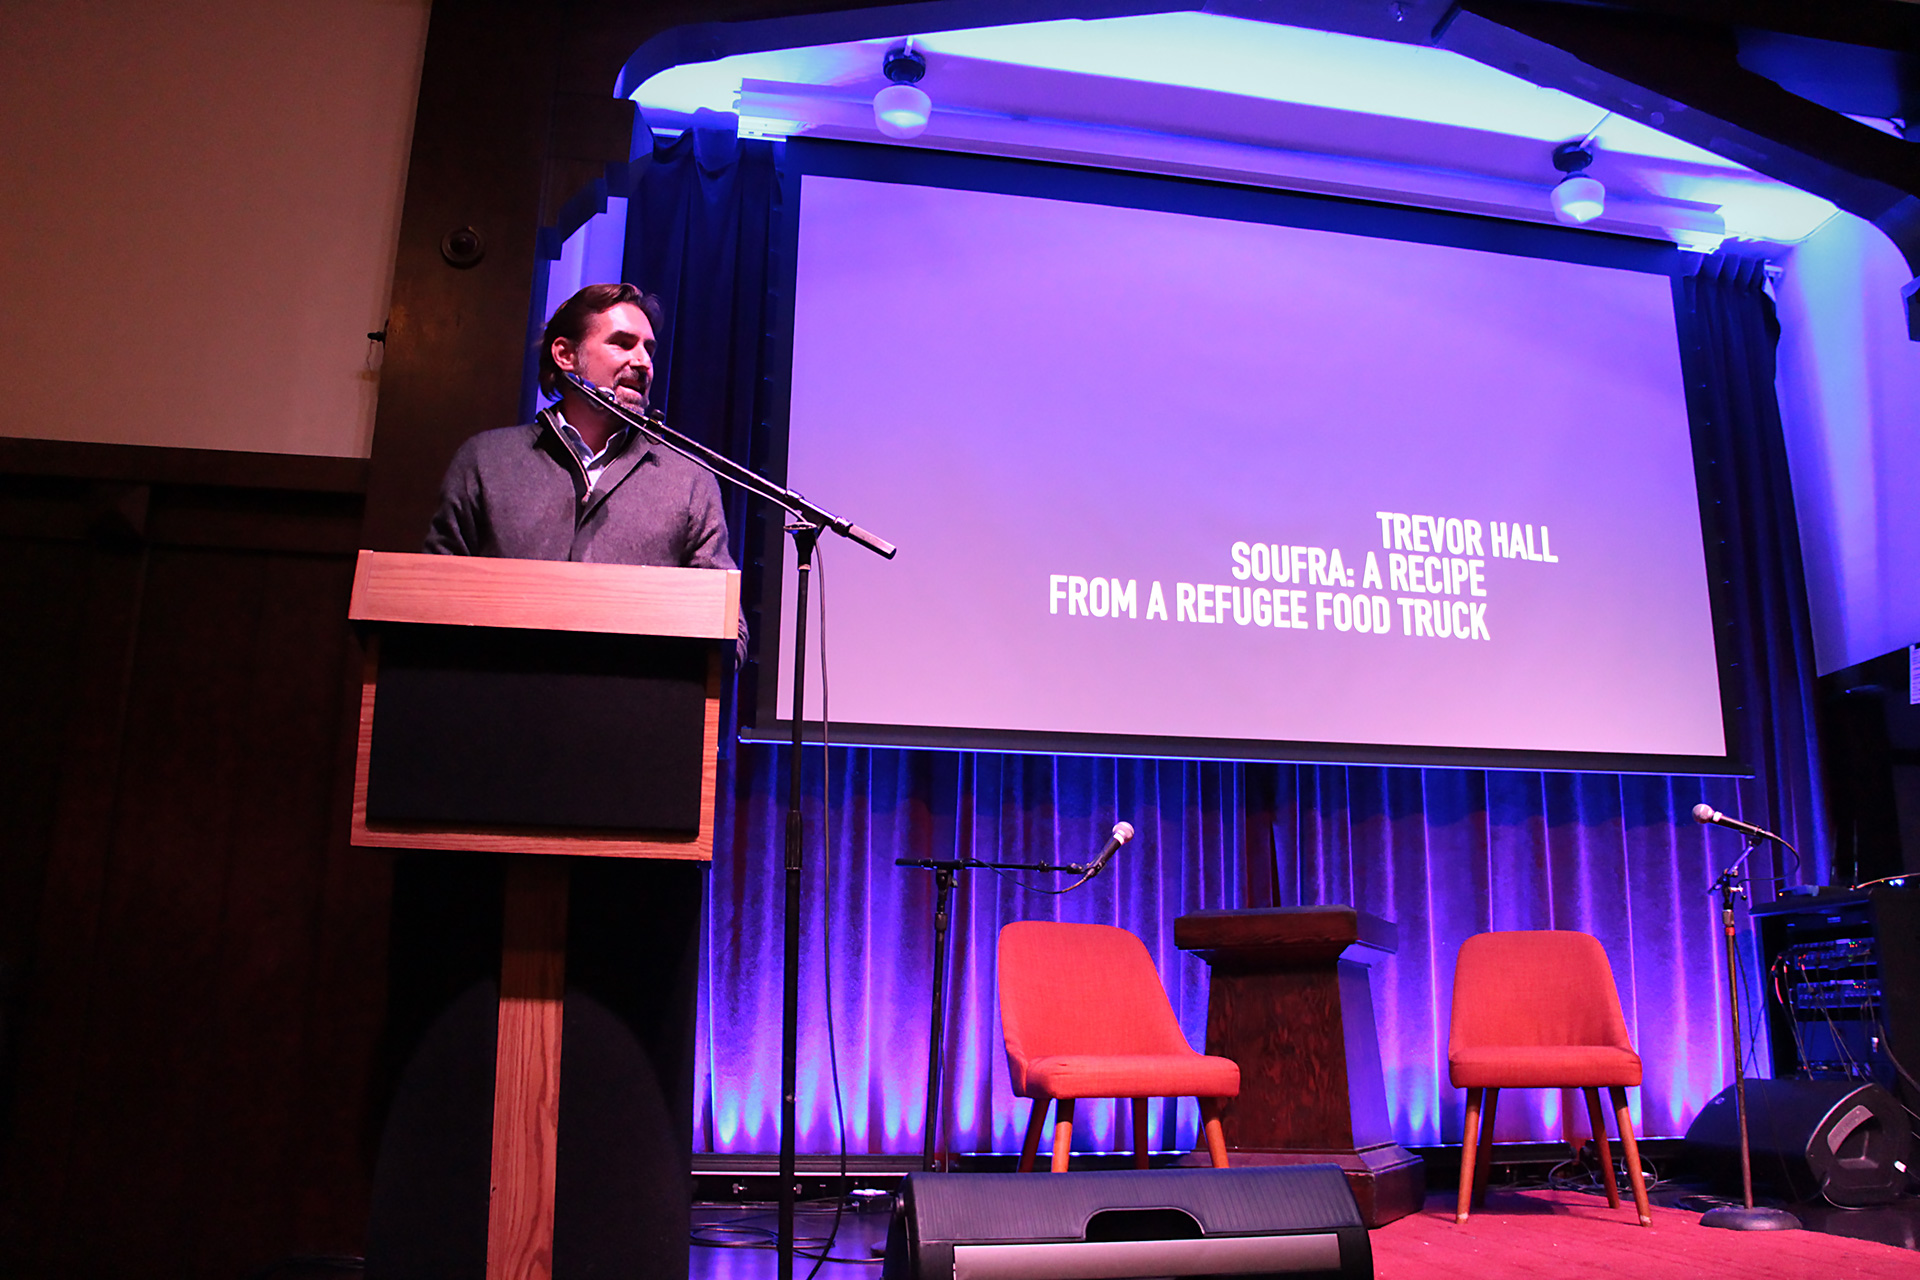 The most powerful example of the connection between food and refuge came in film clips from an upcoming documentary called: Soufra: A Recipe from a Refugee Food Truck, presented by producer Trevor Hall.